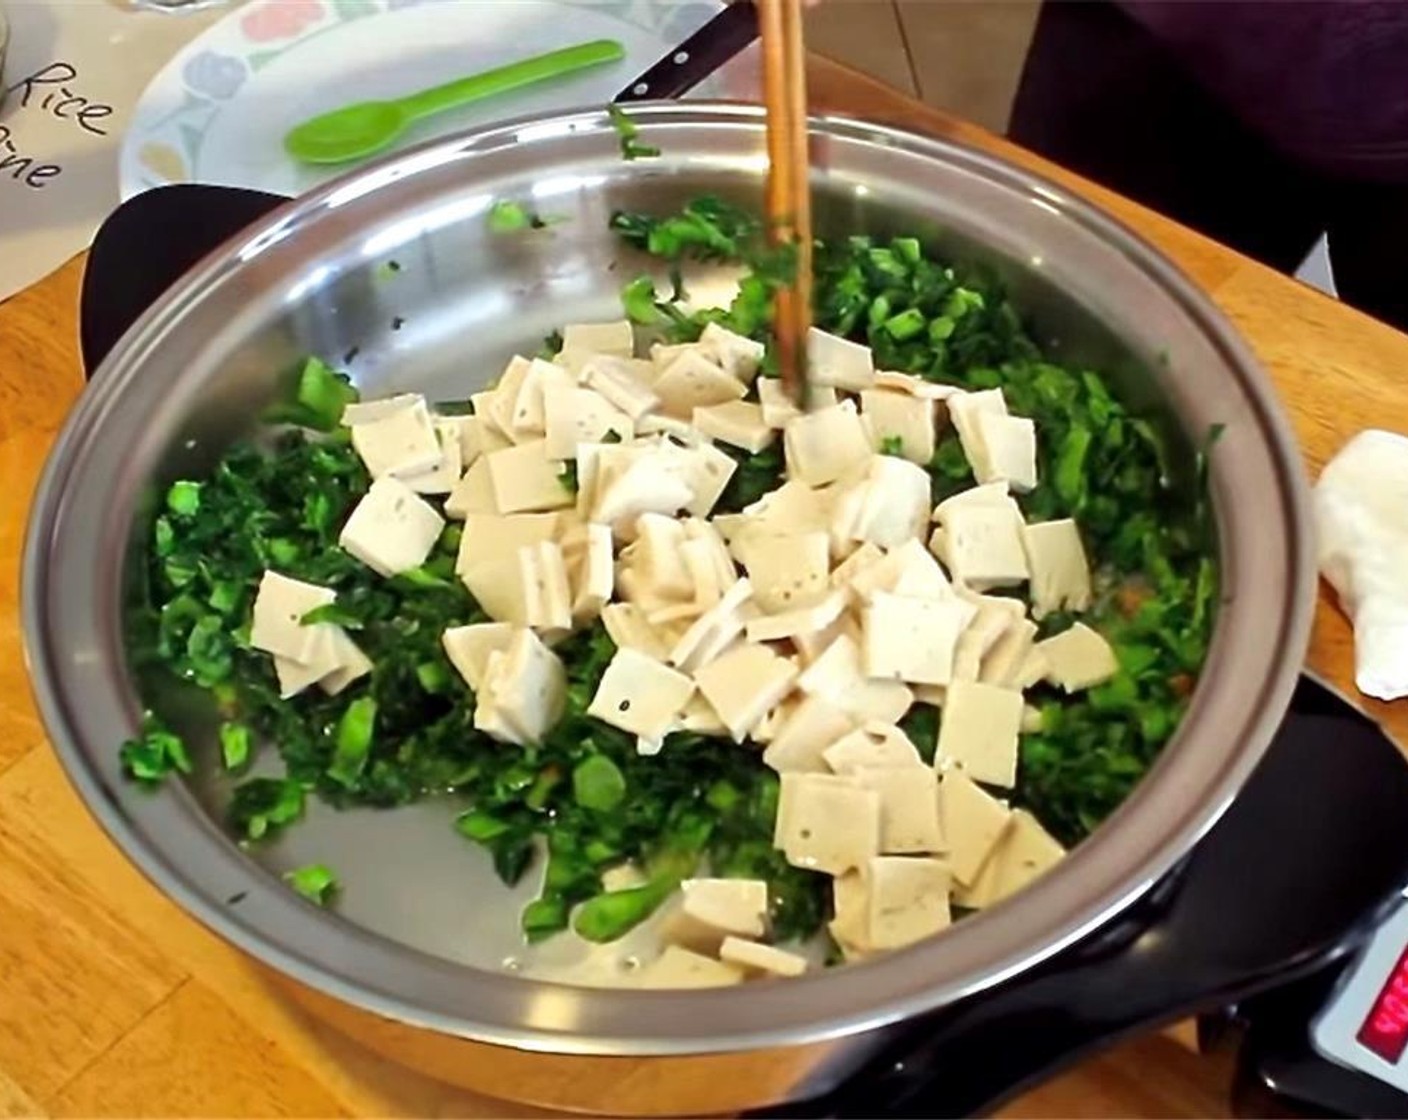 step 4 Mix well, then add the bean curd and Ground White Pepper (1/2 tsp). Stir, then transfer to a plate.